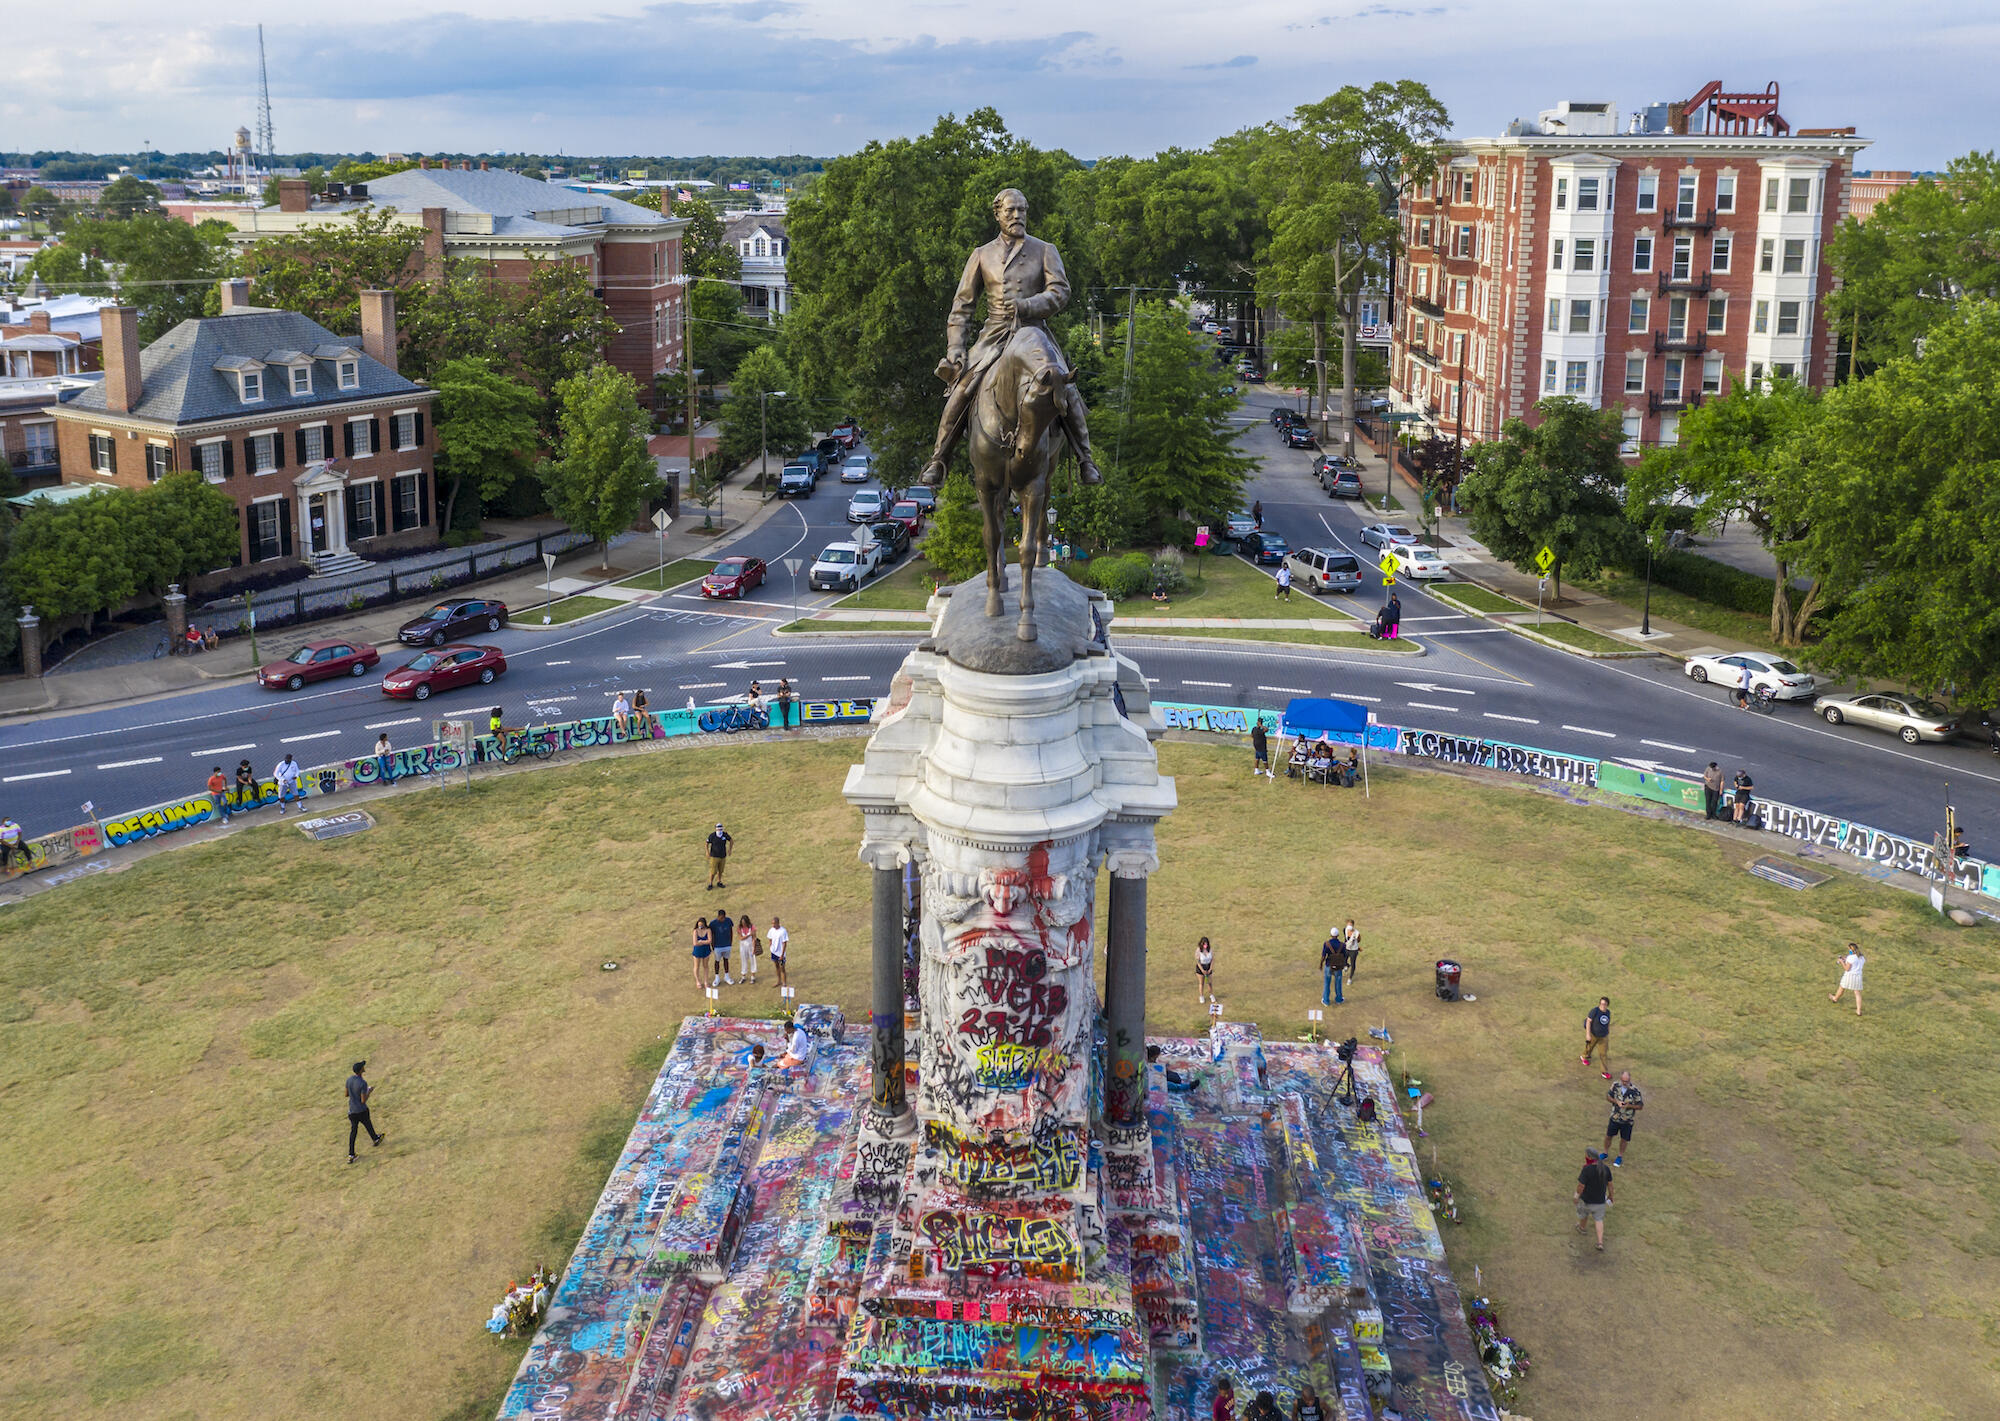 The Robert E. Lee monument in June 2020, covered in graffiti